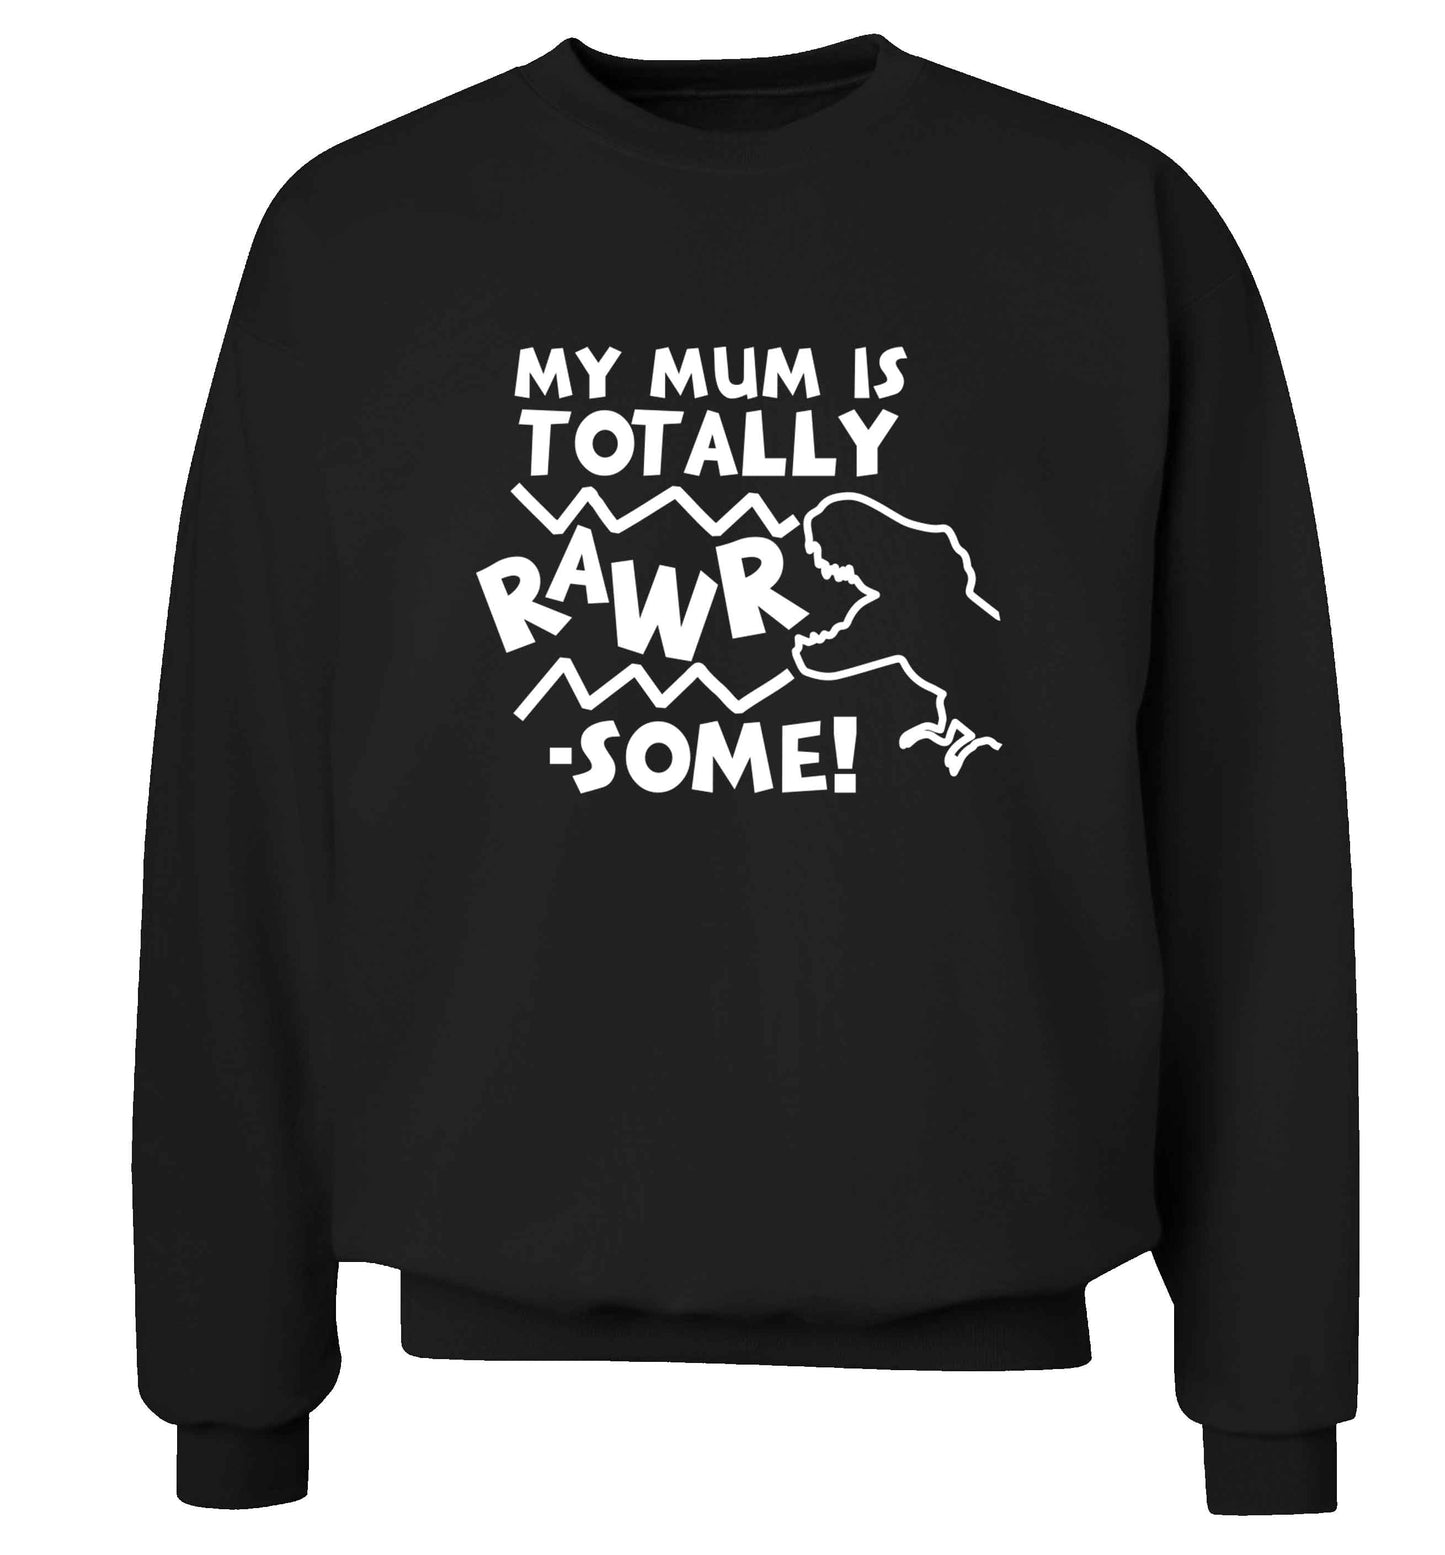 My mum is totally rawrsome adult's unisex black sweater 2XL